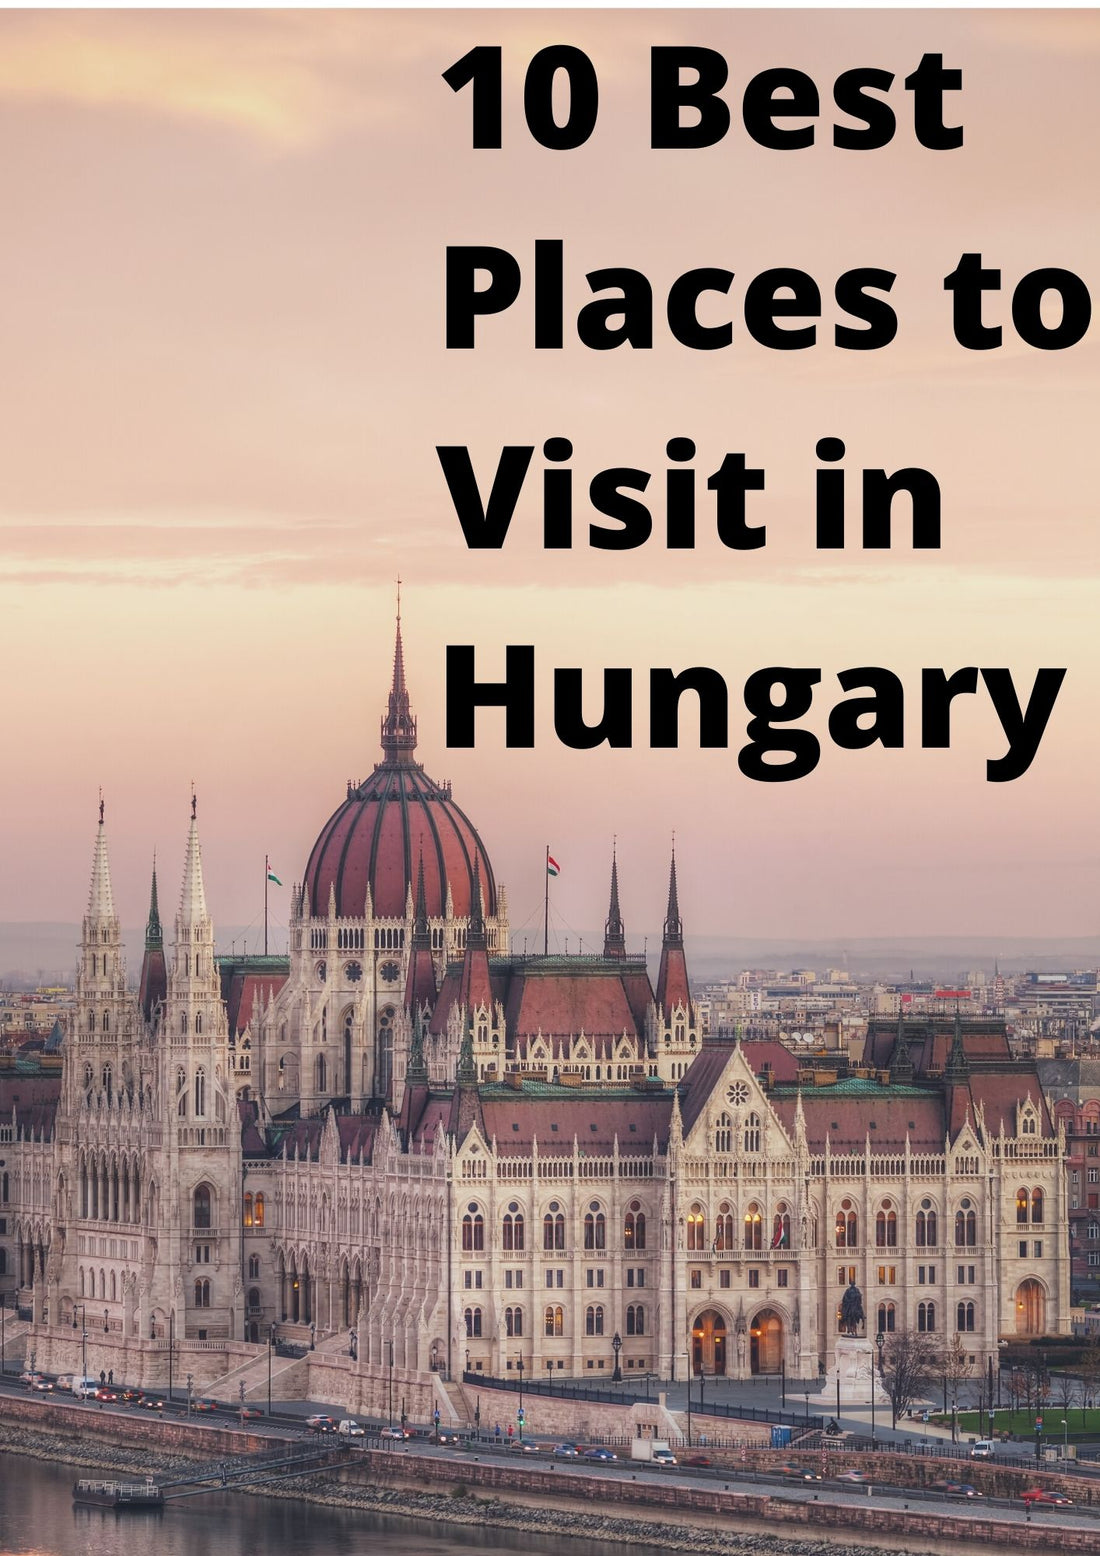 10 Best Places to Visit in Hungary